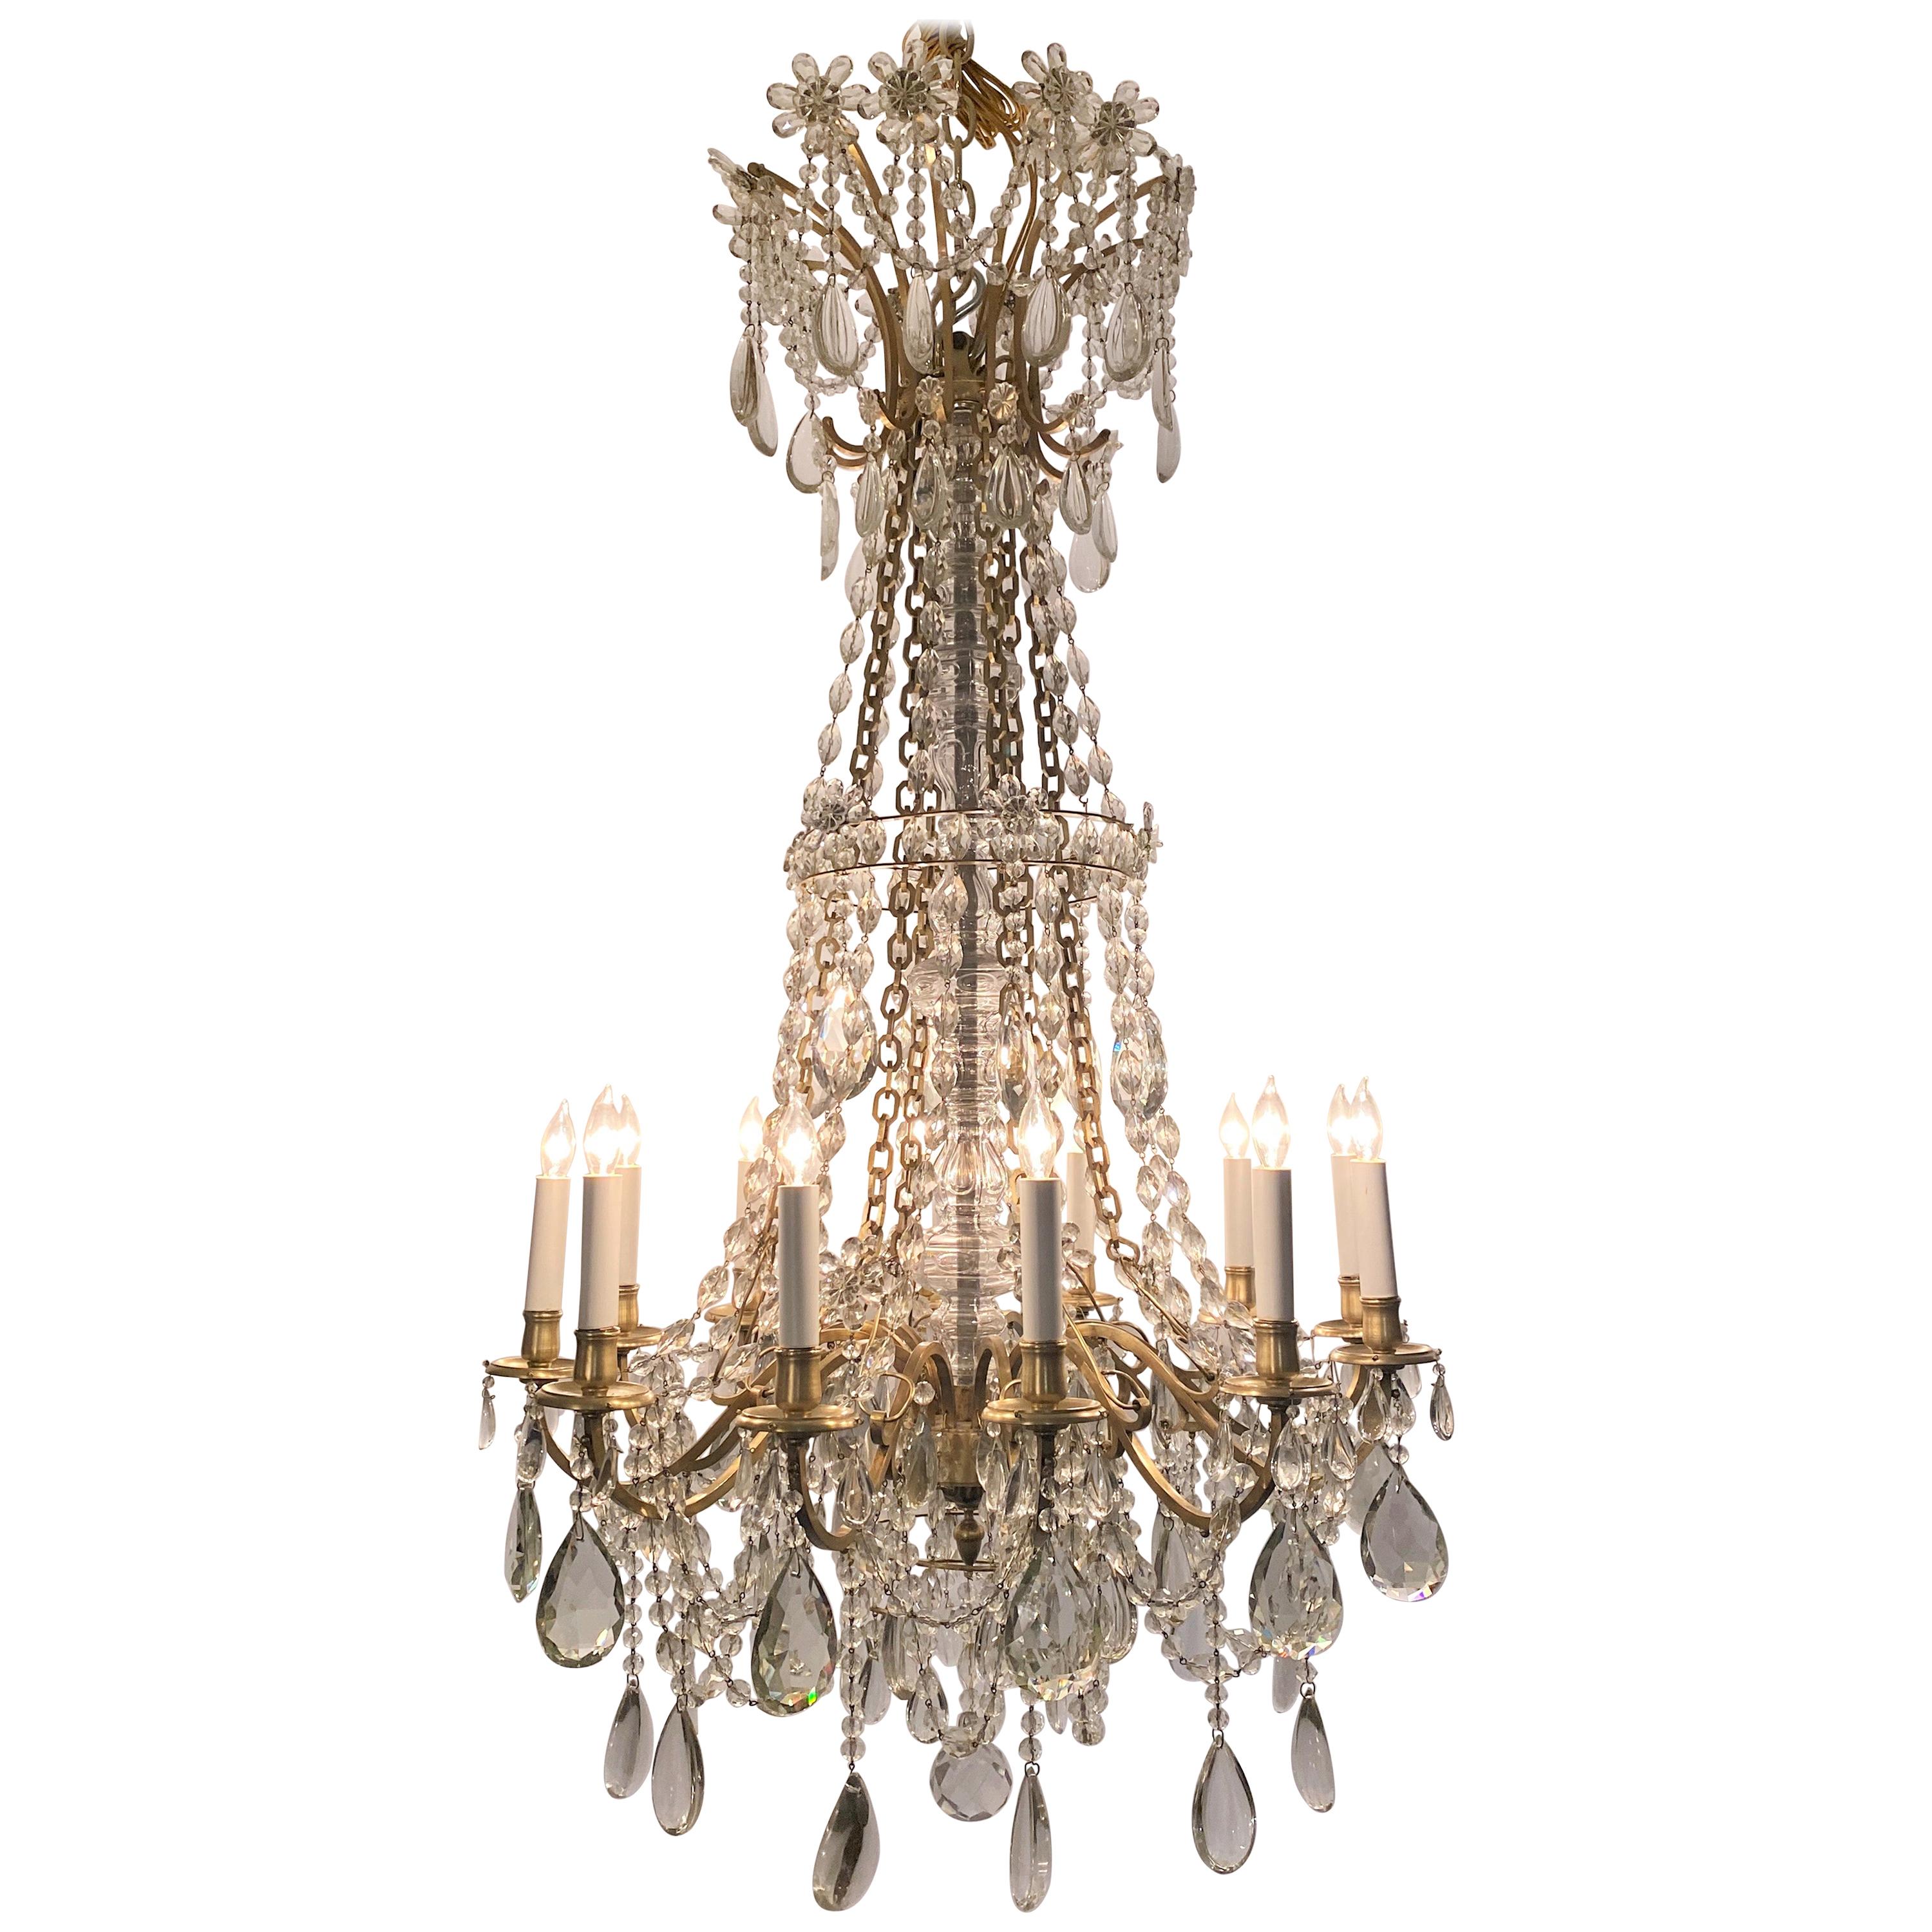 Antique French Baccarat Crystal and Bronze D'Ore Chandelier, circa 1890 For Sale